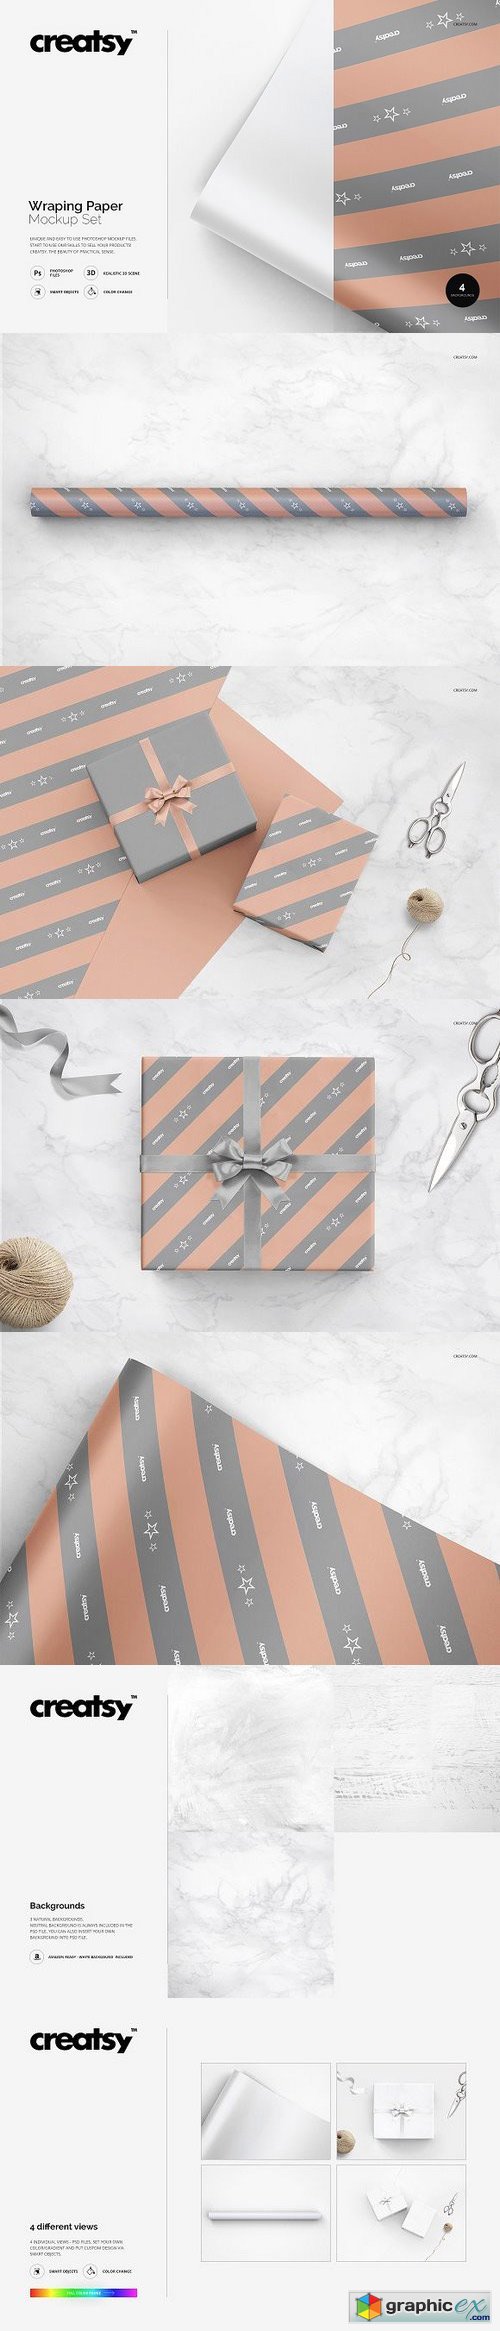 Wrapping Paper Mockup Set